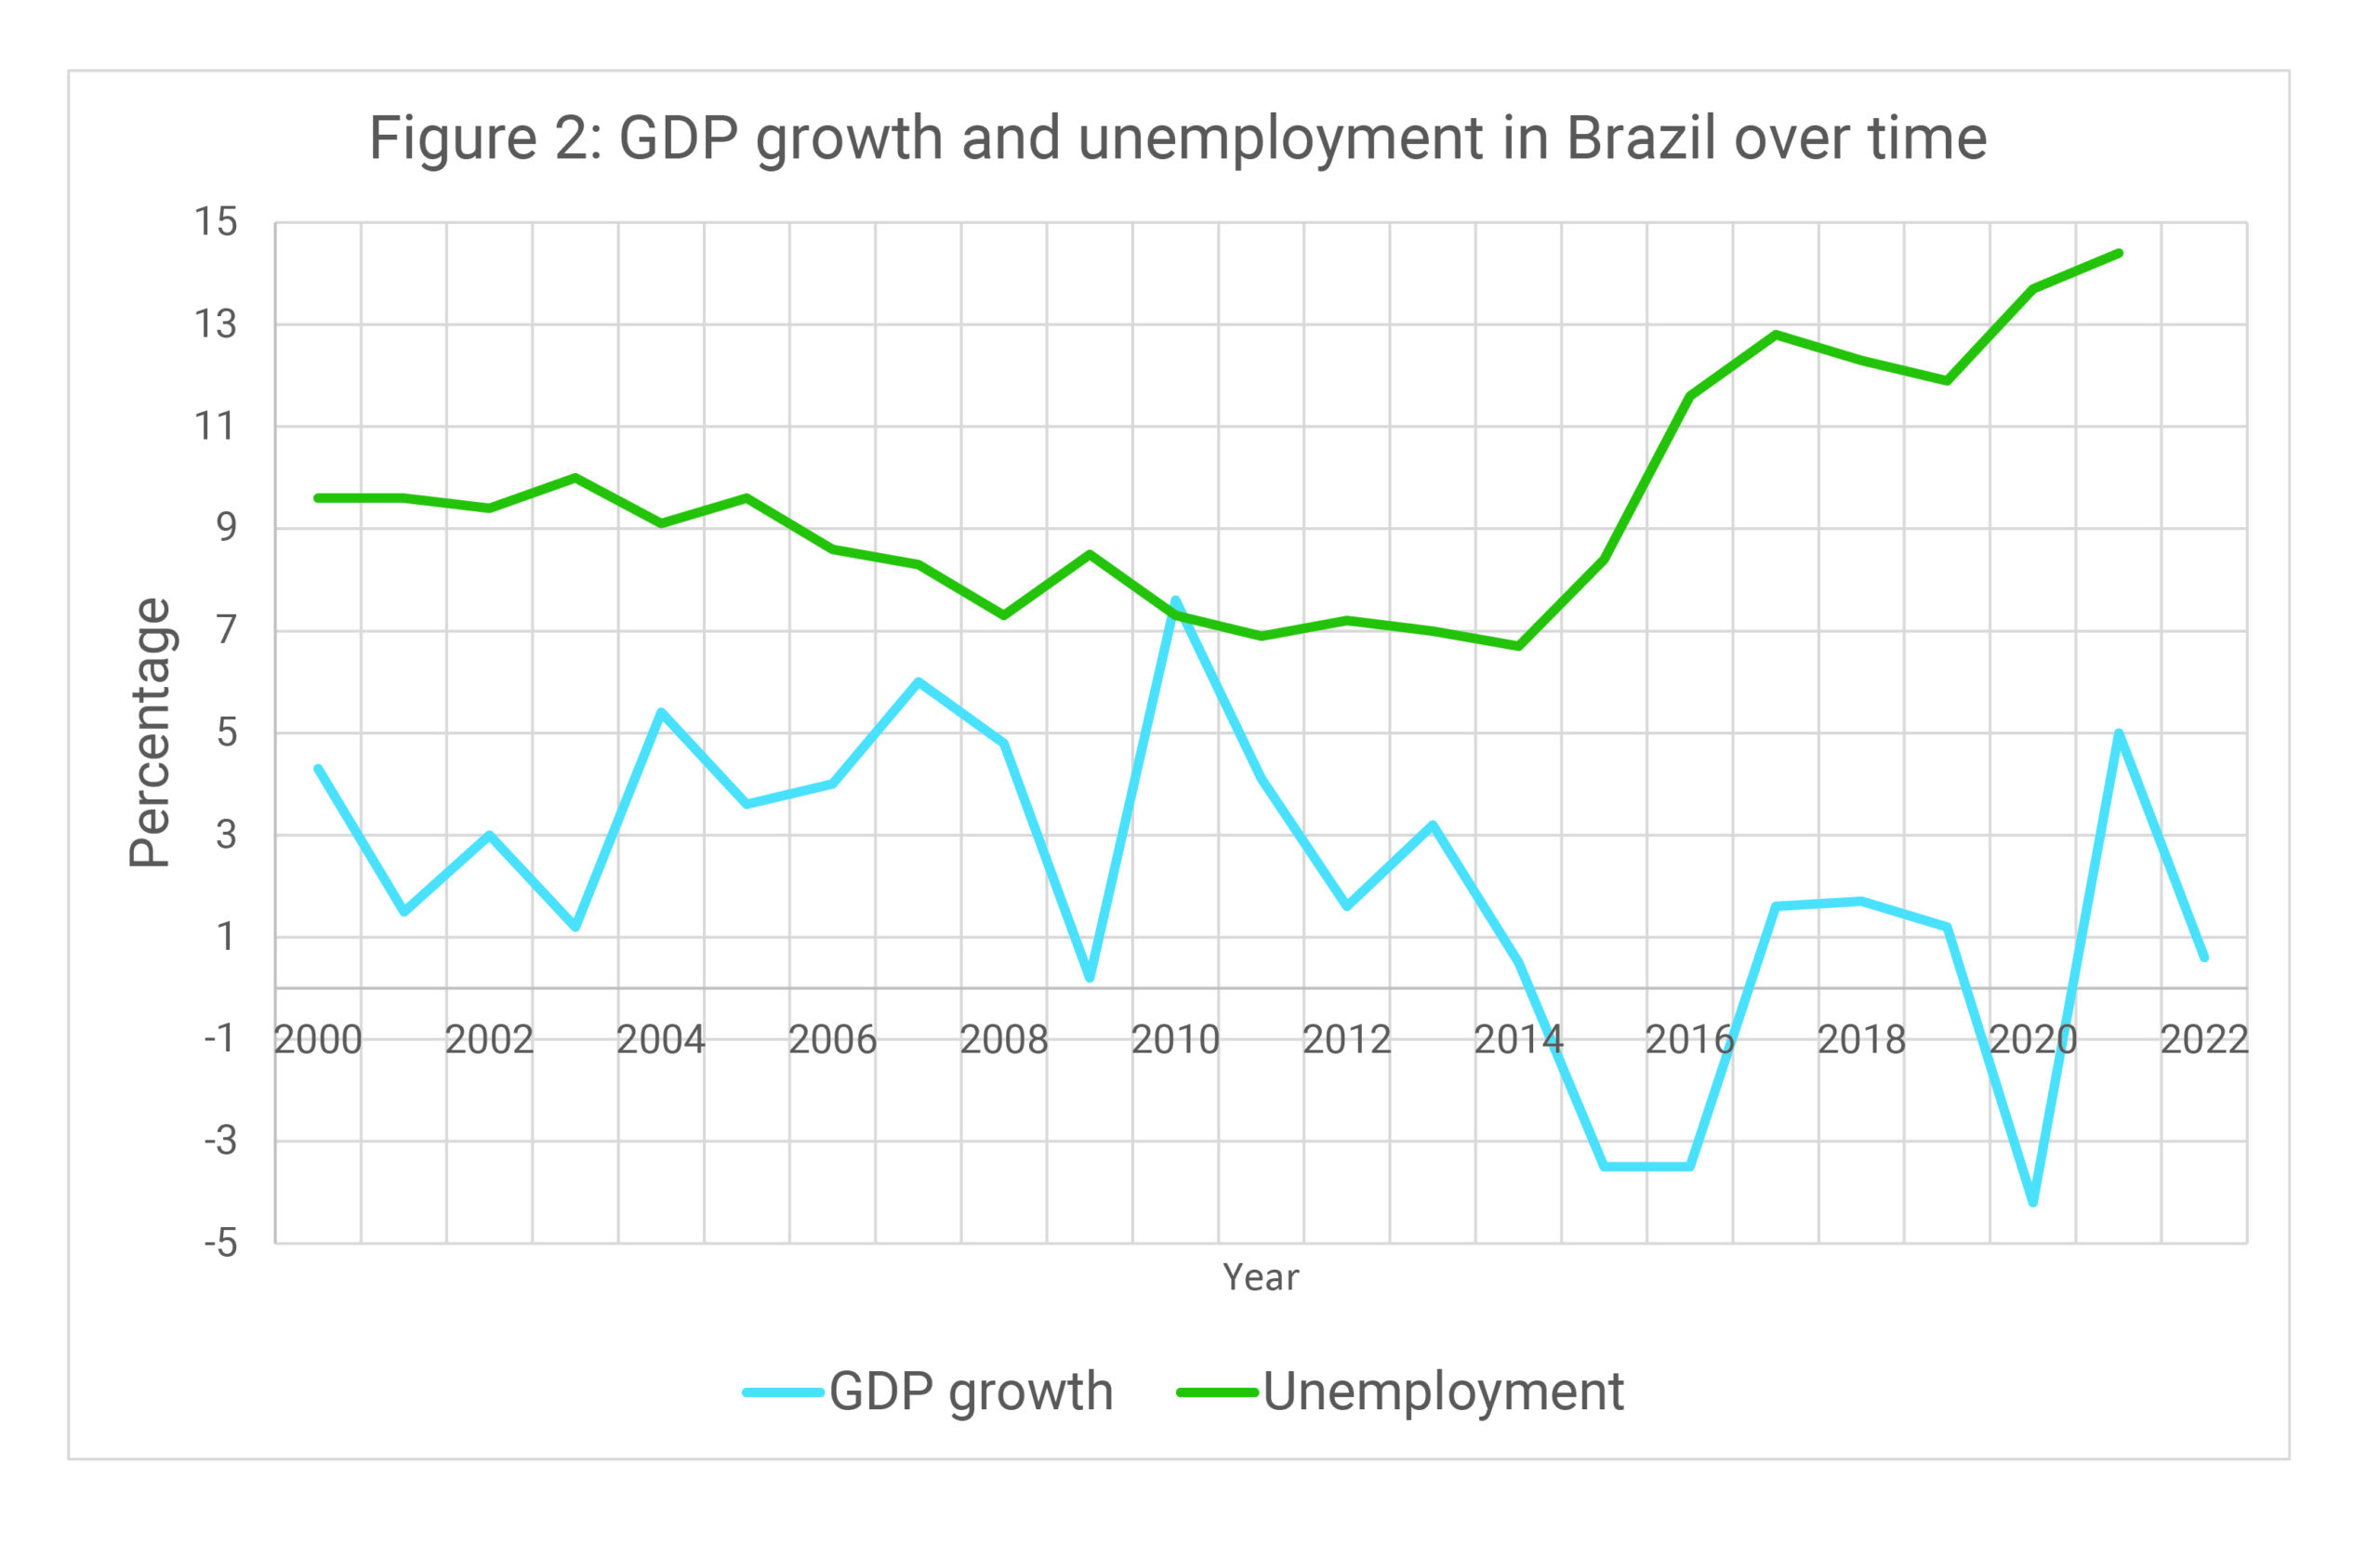 Figure 2: GDP growth and unemployment in Brazil (in %). The figure contains two graphs. The graph for the unemployment in Brazil starts out roughly 10% of the labor force in 2000 and then from 2014/2015 on experiences a sharp rise to end up being roughly 15% in 2020. GDP growth starts out with roughly 5% in 2000 and then with some ups and downs lands at a low point of almost -5% in 2015 and then again in 2020.